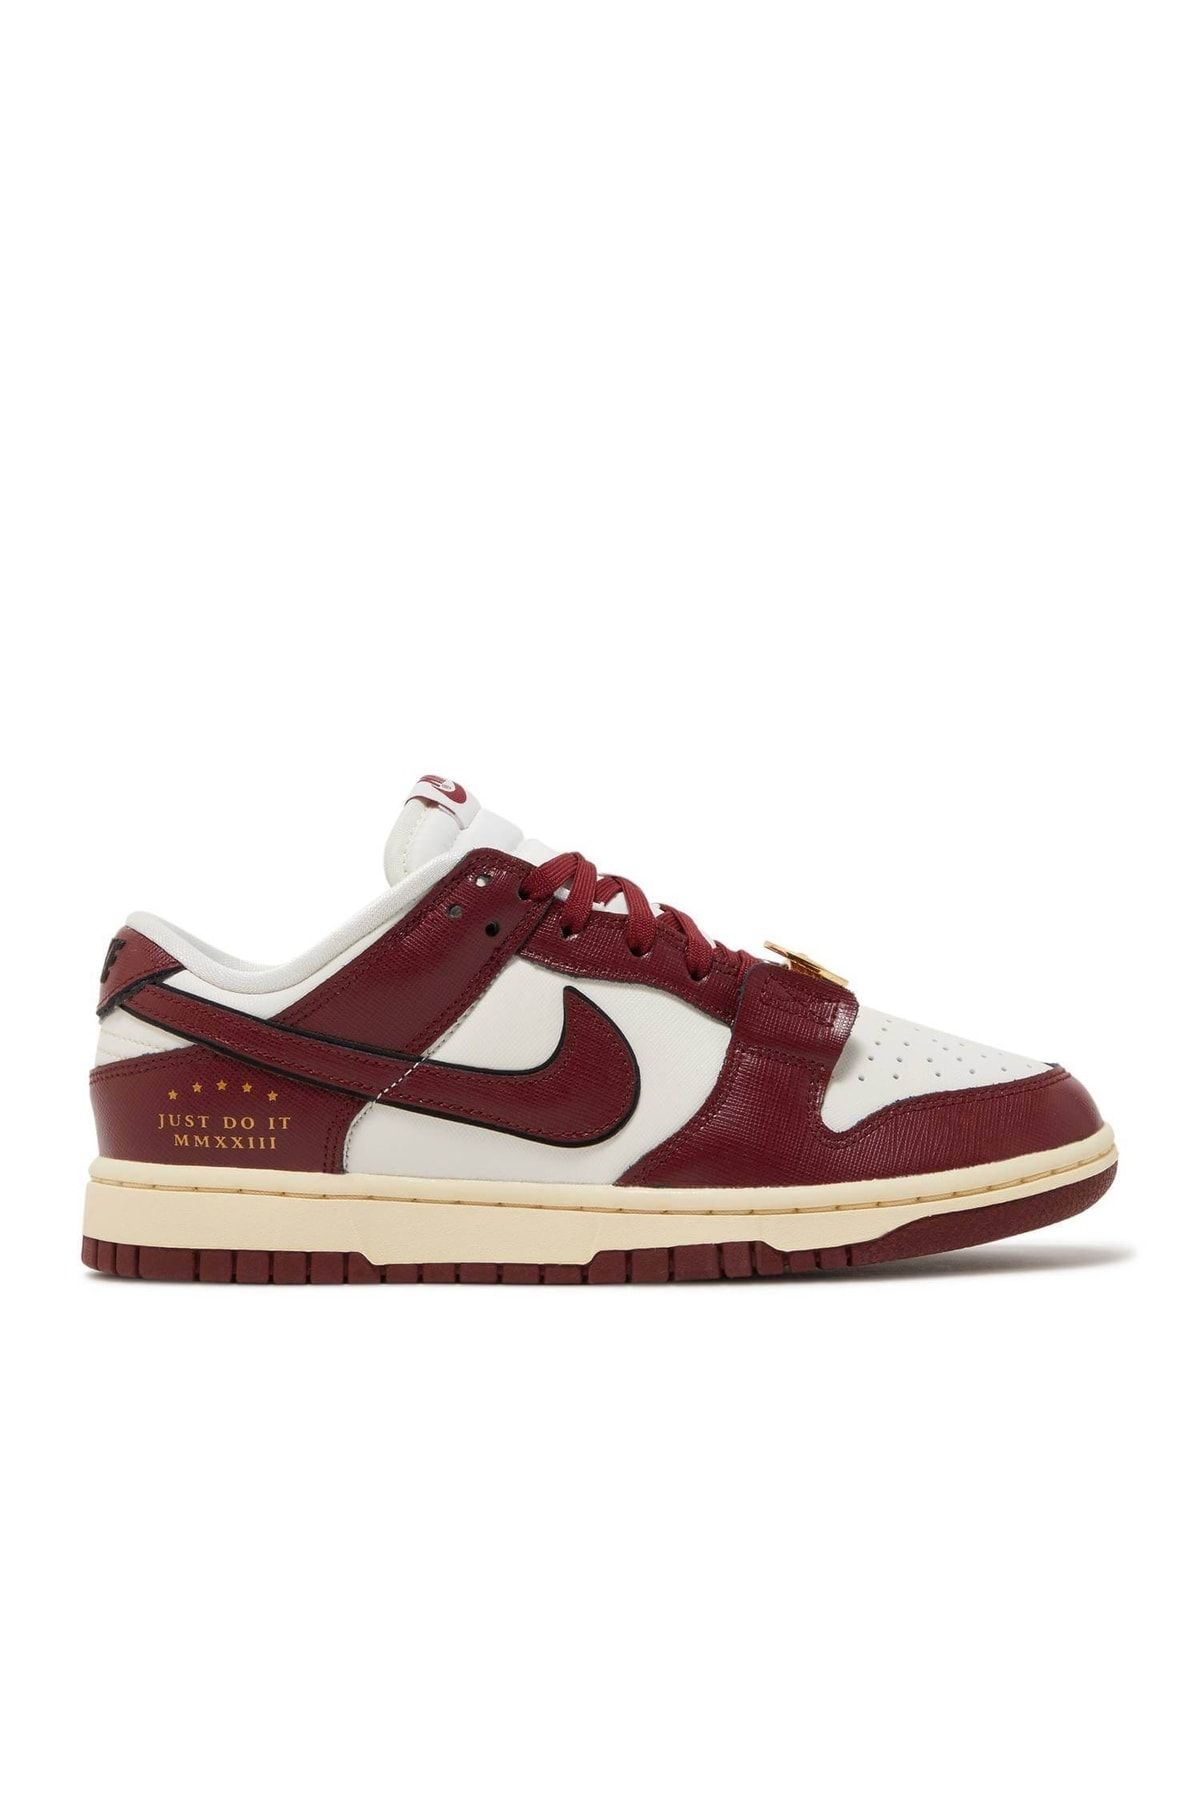 Nike Dunk Low Se Just Do It Sail Team Red